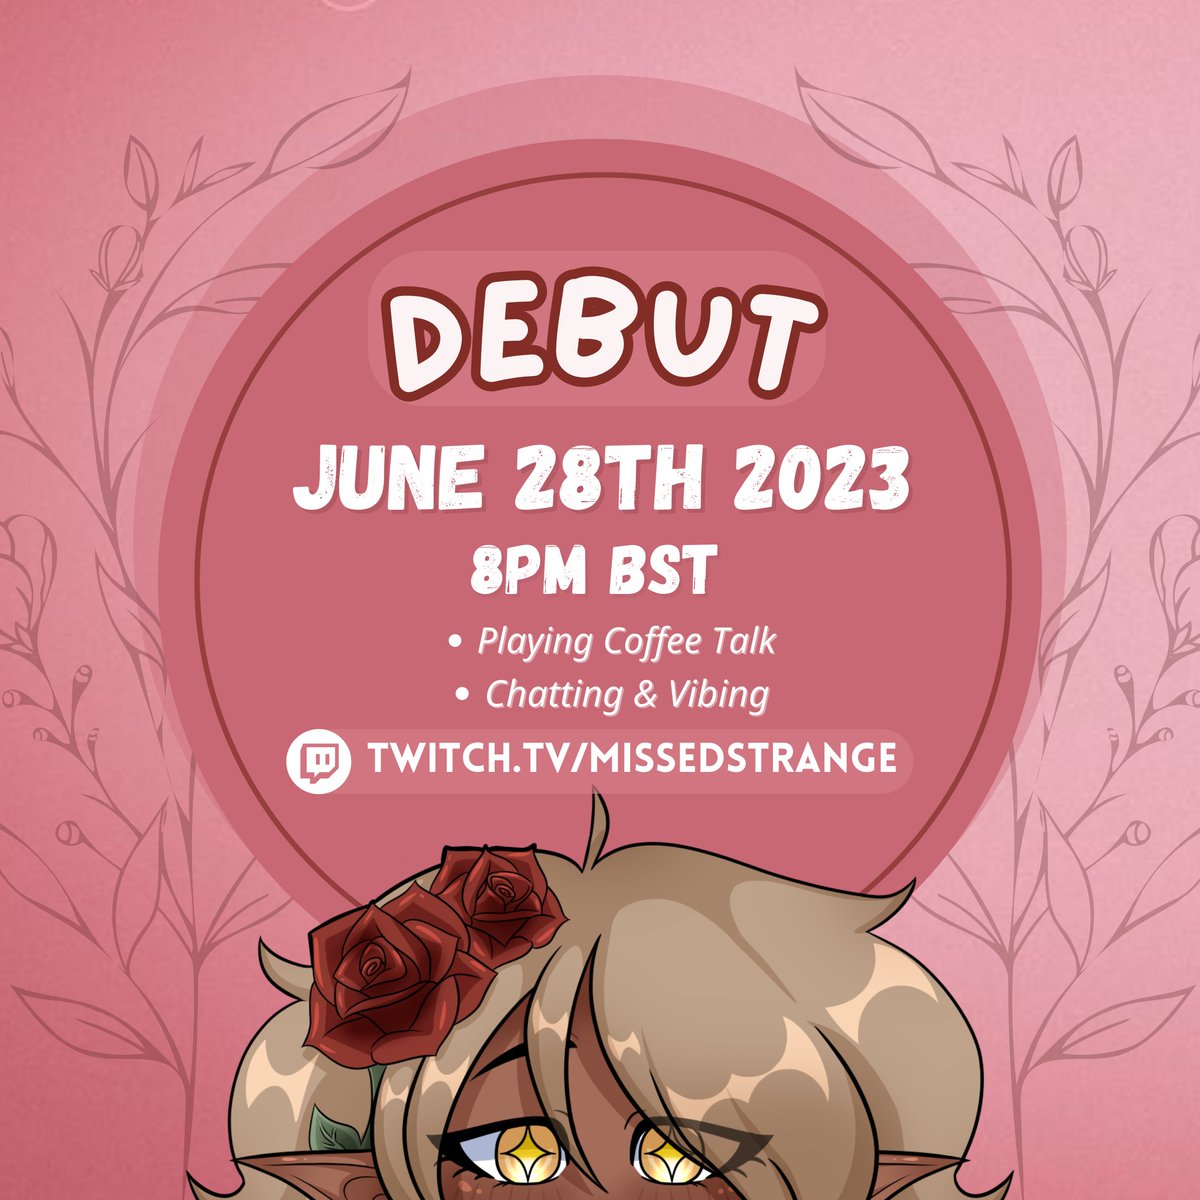 You're invited! 💌✨ 🕐I will be debuting on the 28th June @ 8PM BST 🎮☕️We'll be playing some Coffee Talk & vibing. Hope to see you there! twitch.tv/missedstrange ❤️🔁are appreciated~✨🙇‍♂️ [ #vtuber #VtuberDebut #VTuberUprising ]